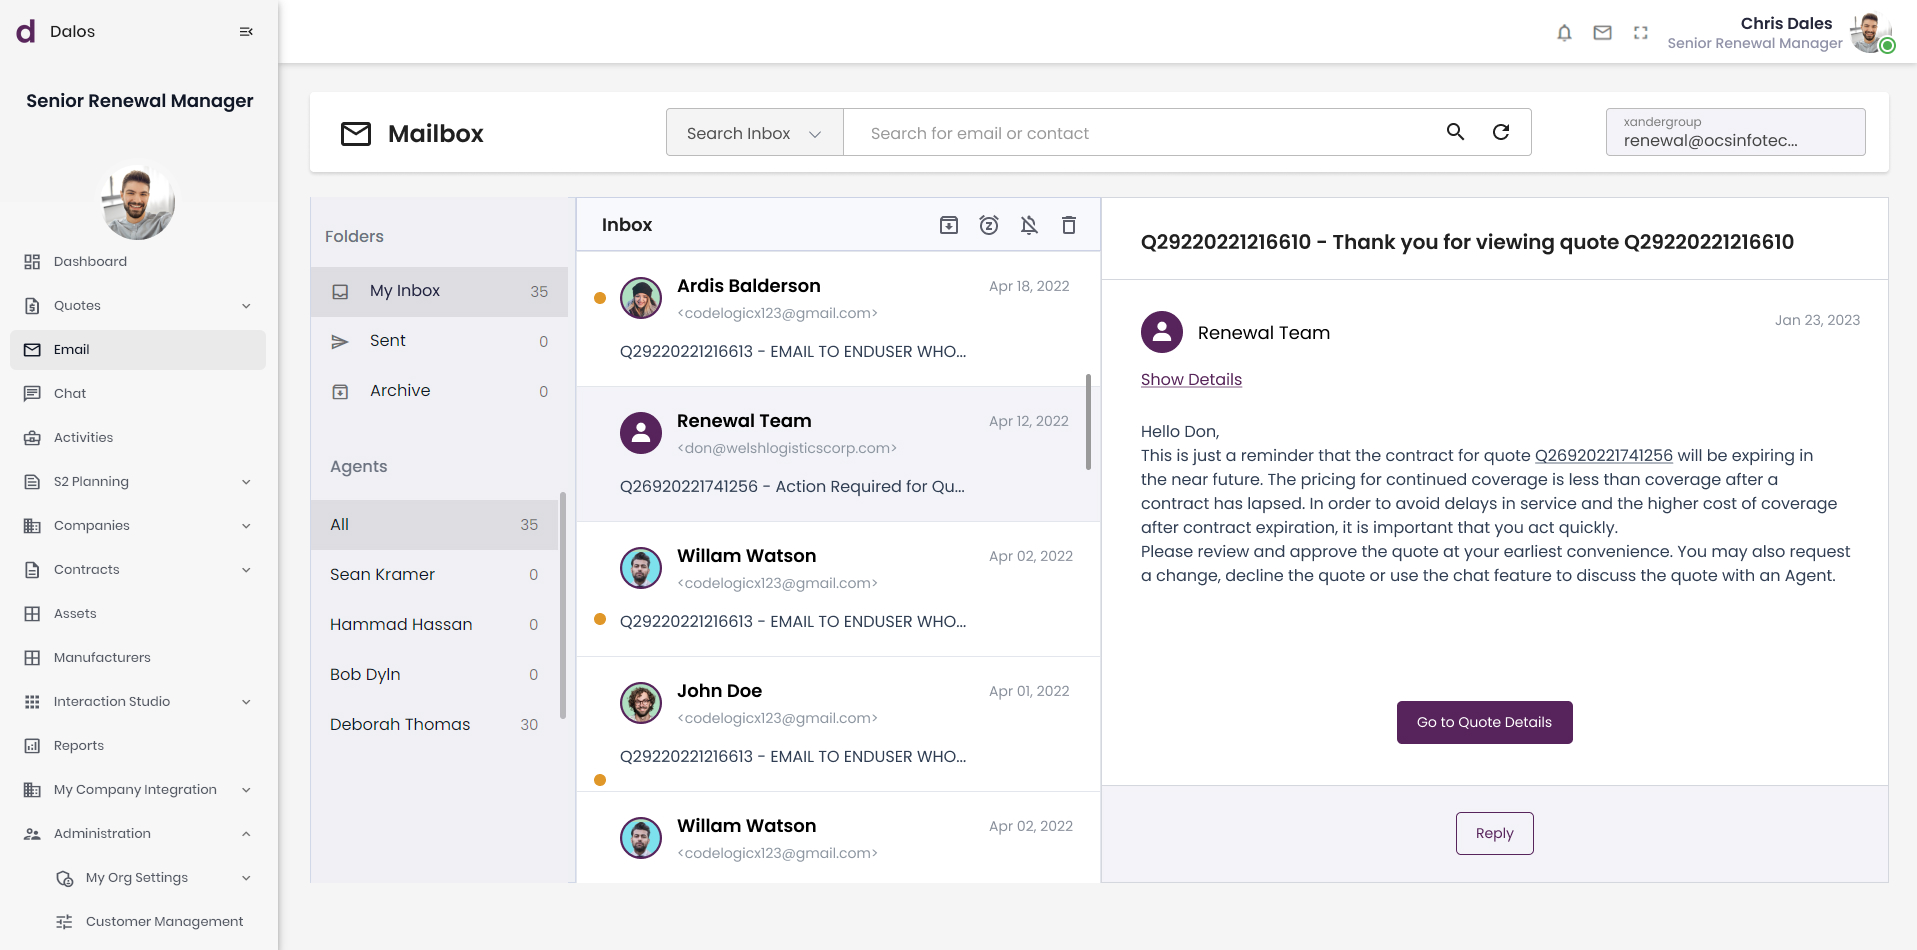 Email Collaboration Feature | Dalos